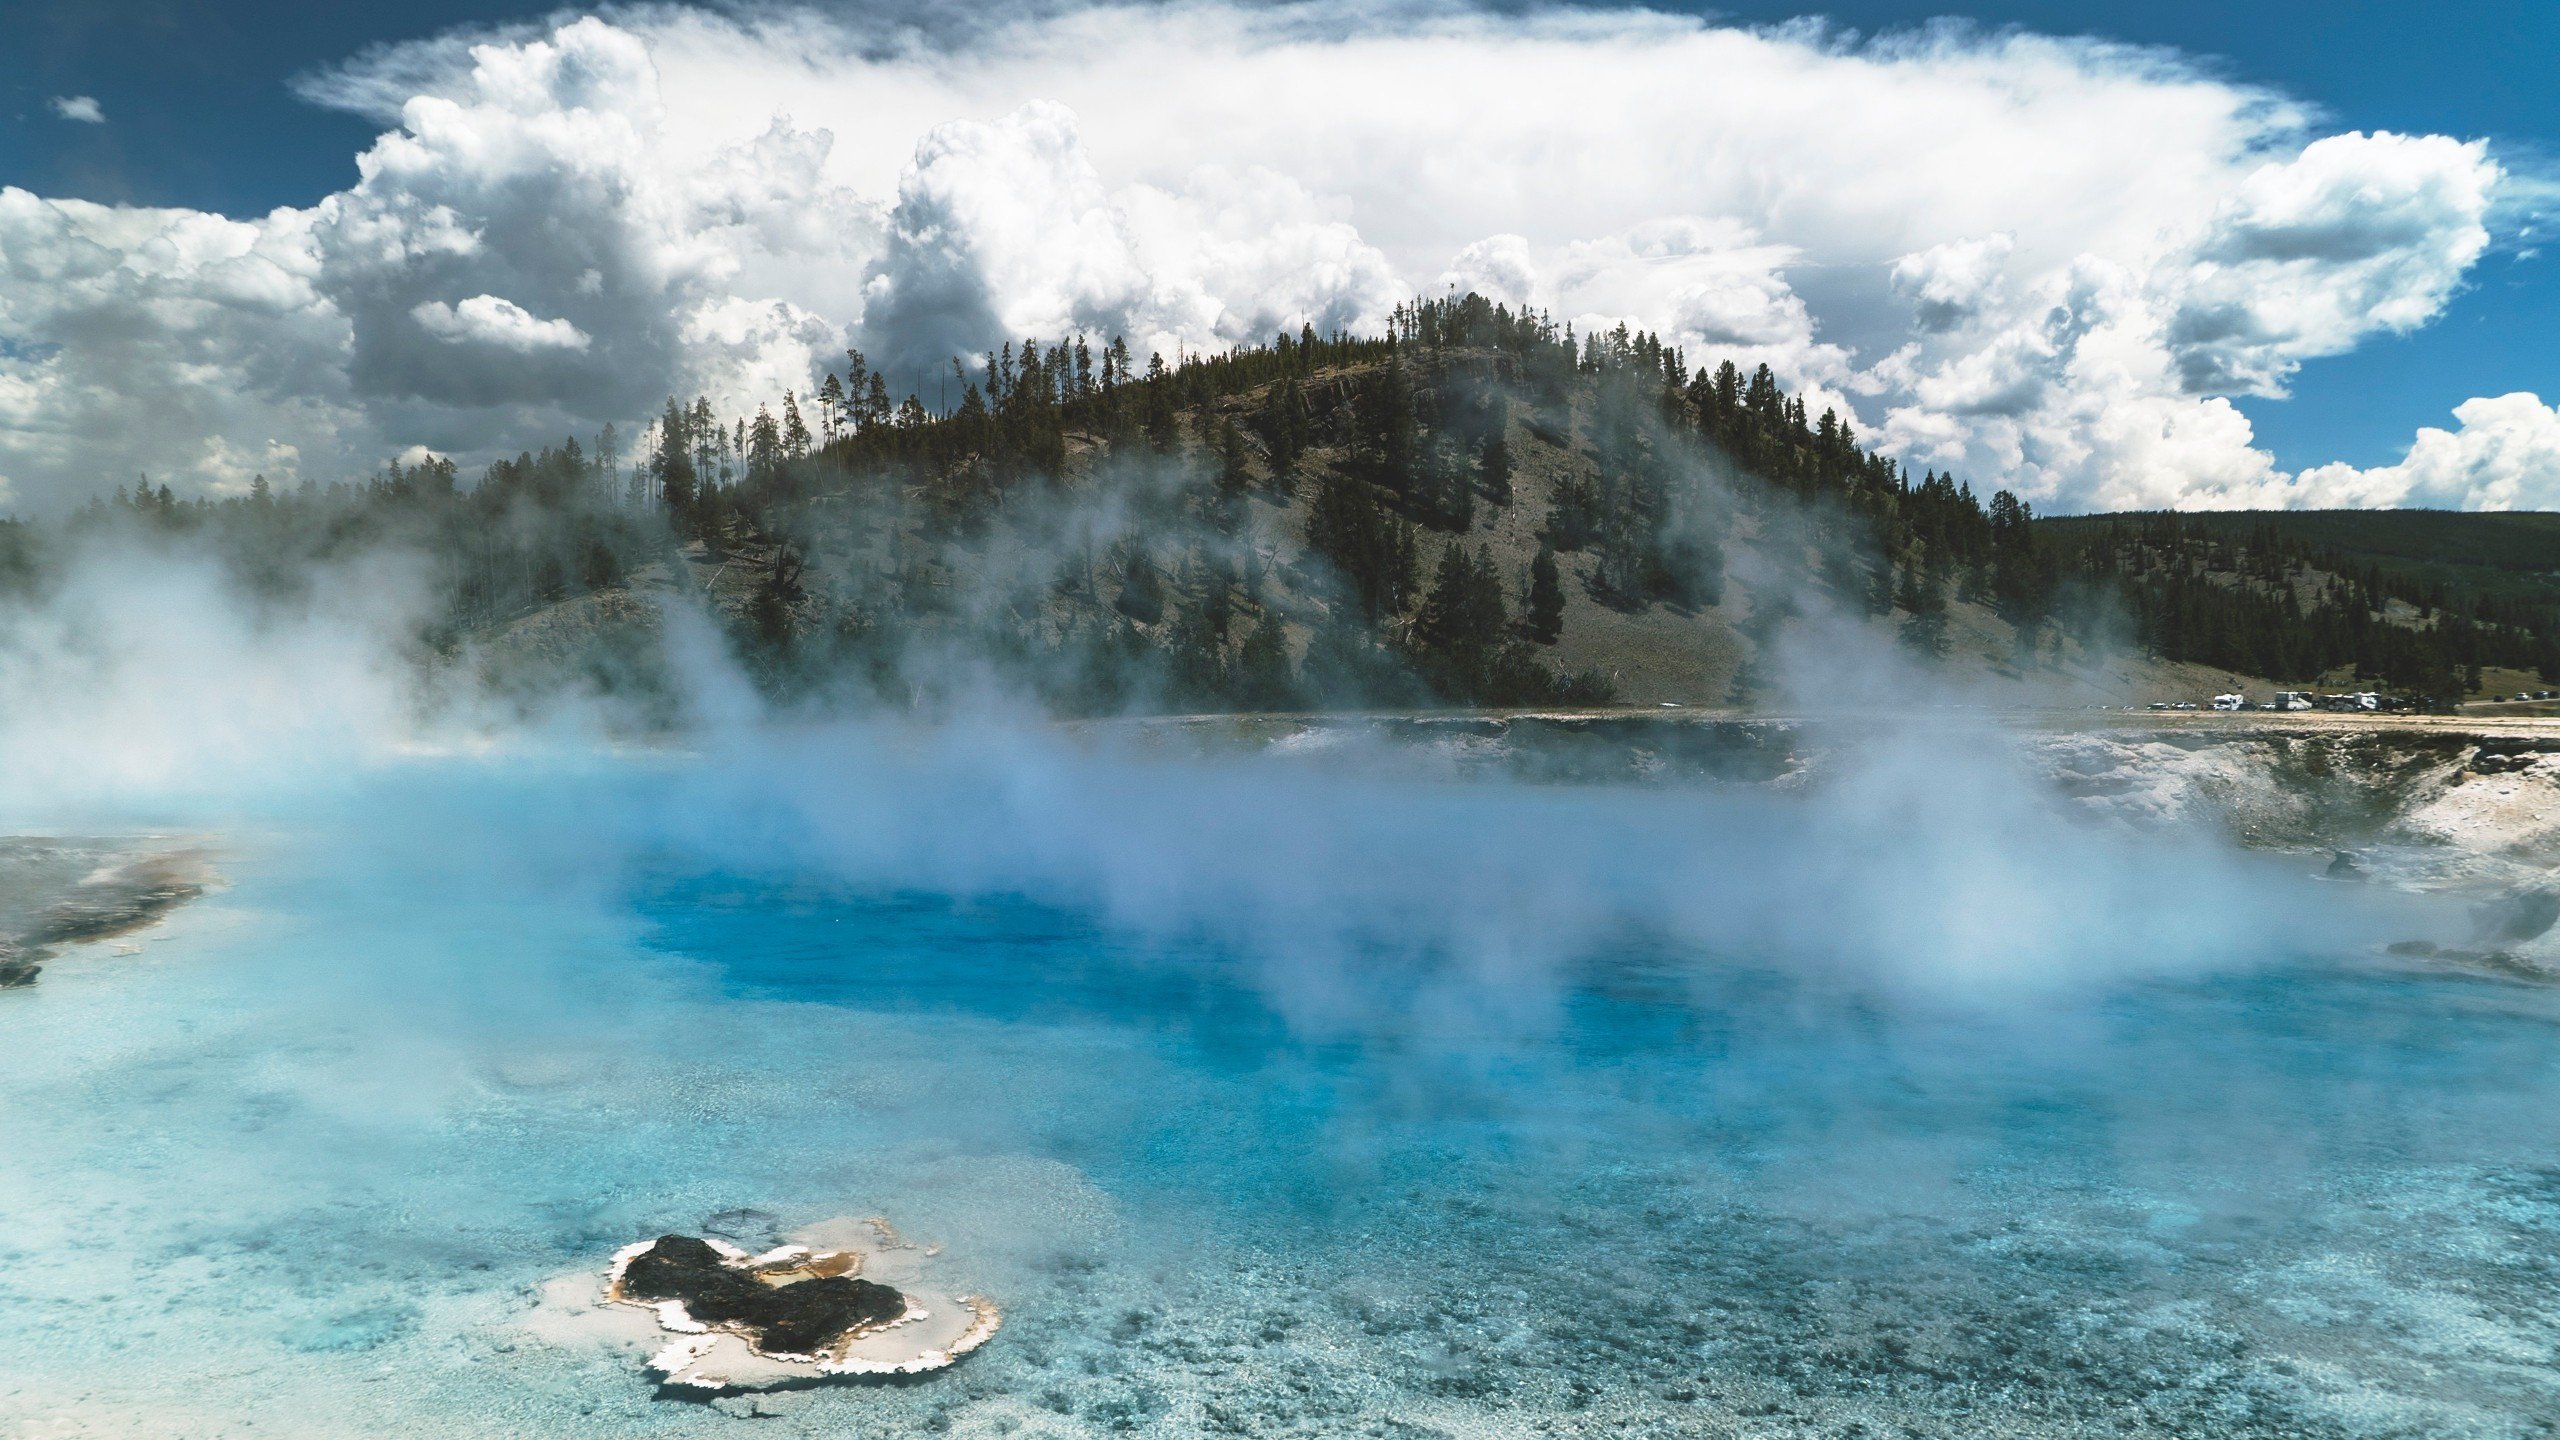 yellowstone national park 1080P, 2k, 4k HD wallpaper, background free download